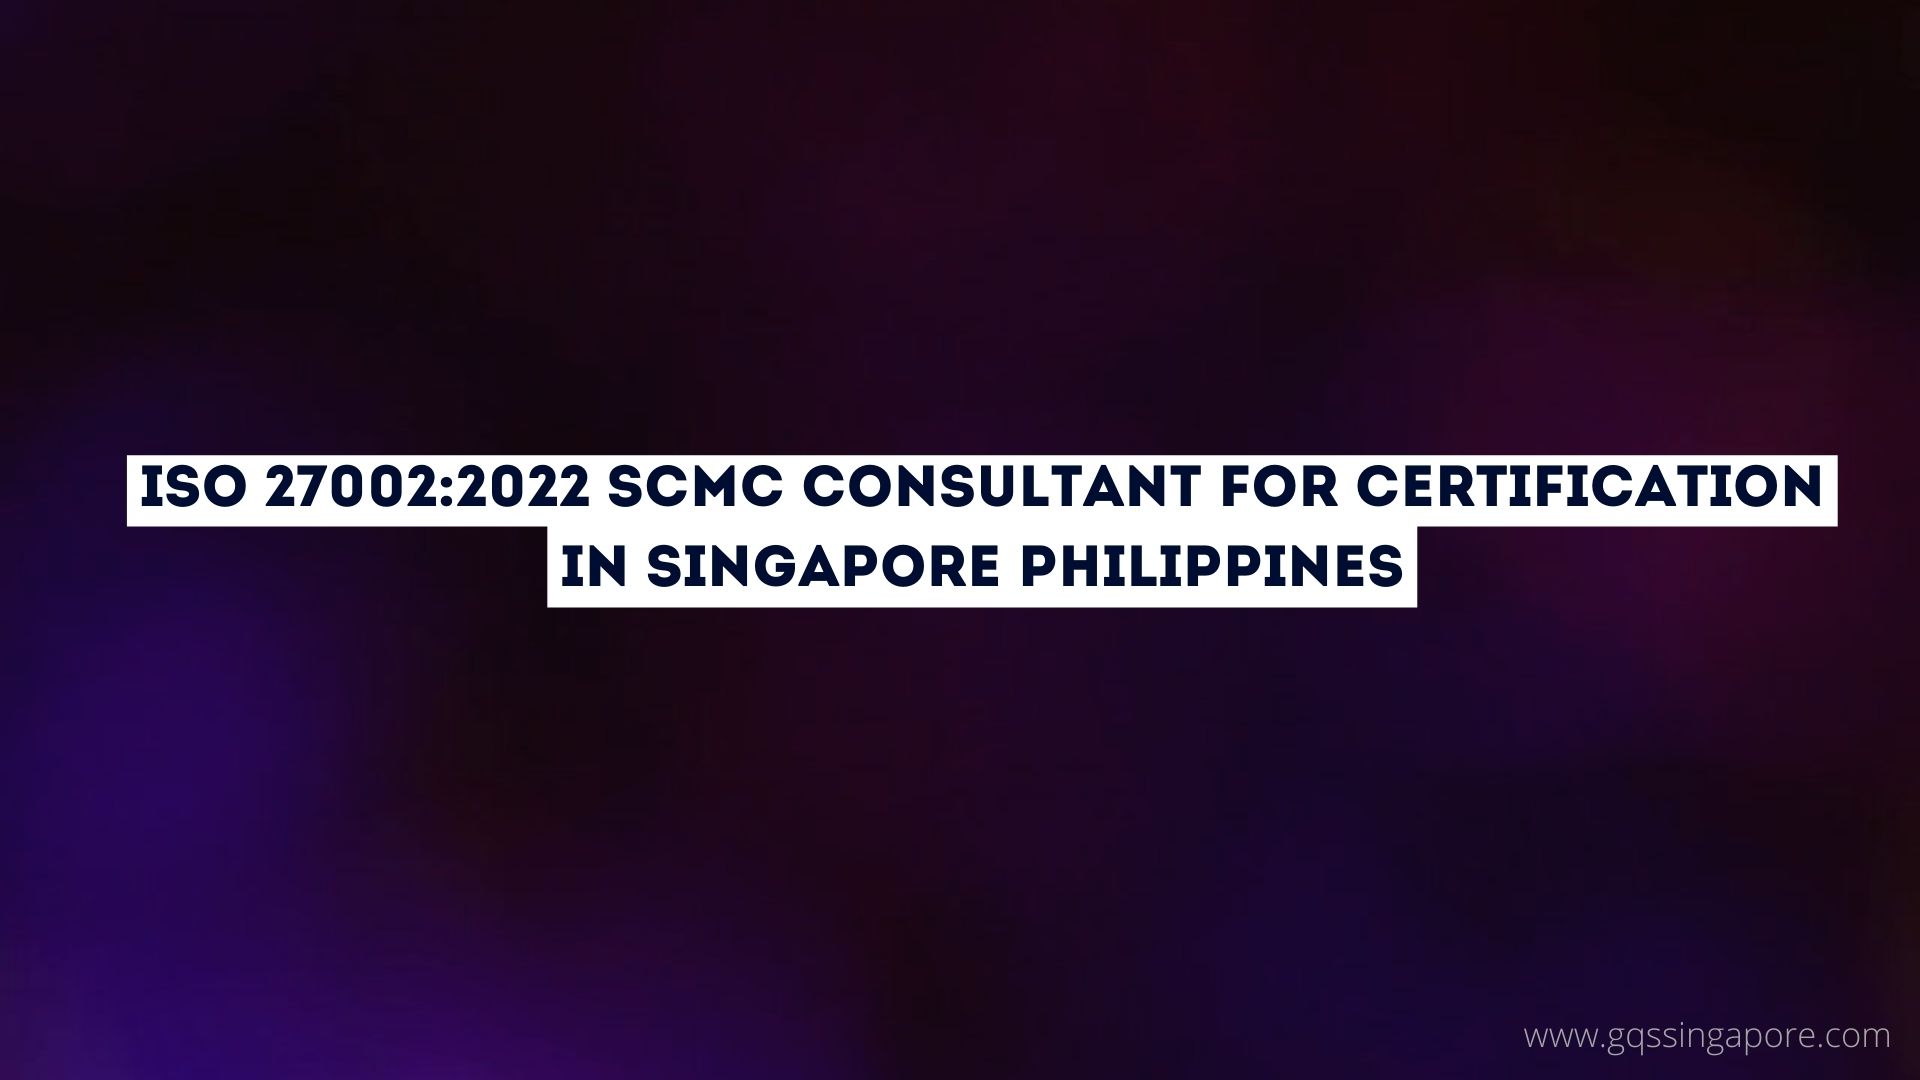 ISO 270022022 SCMC Consultant for certification in Singapore Philippines